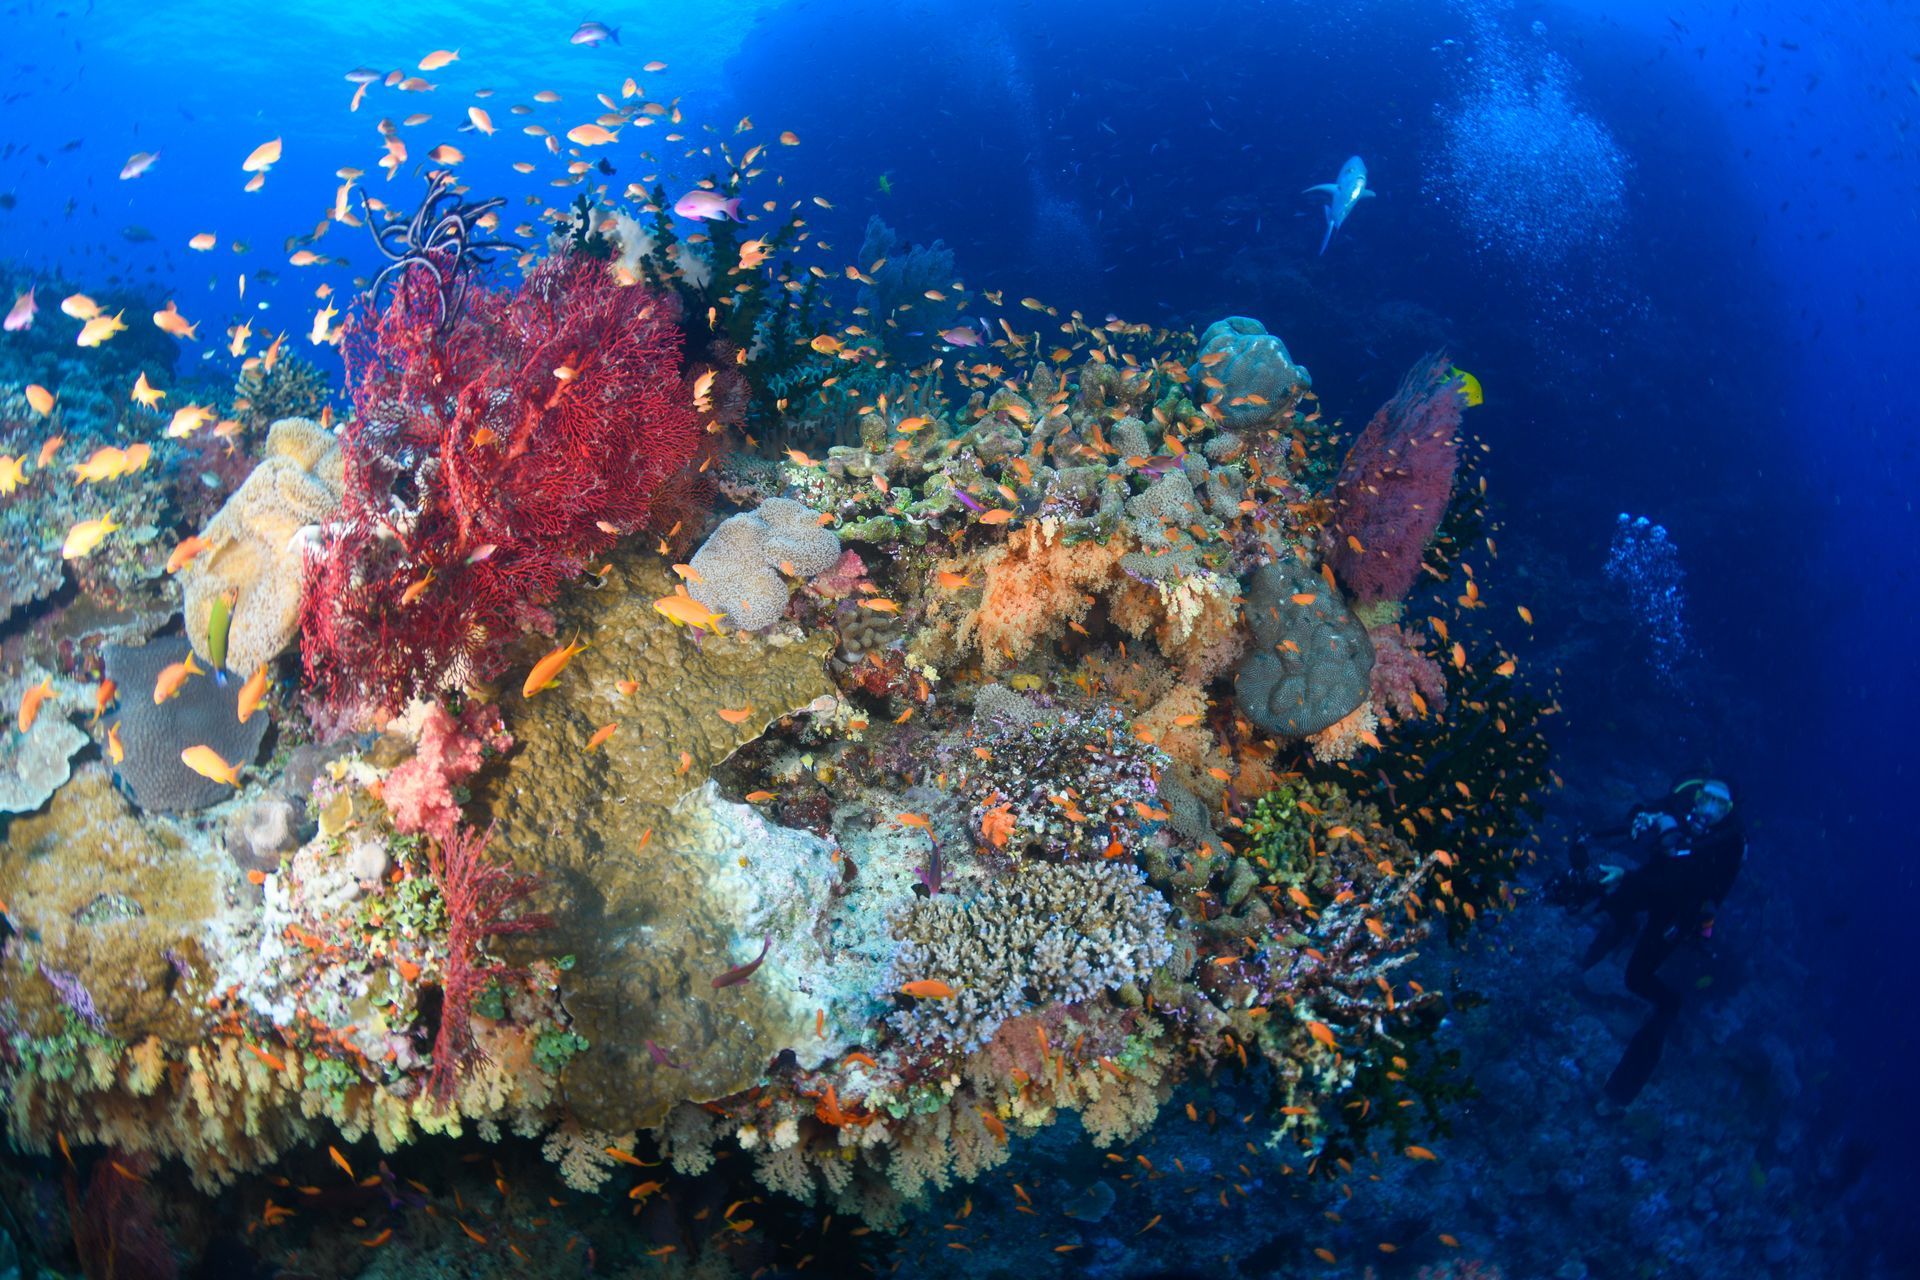 A diver is exploring a soft coral garden on the reef in the blue waters of Fiji during an all inclusive dive package vacation 